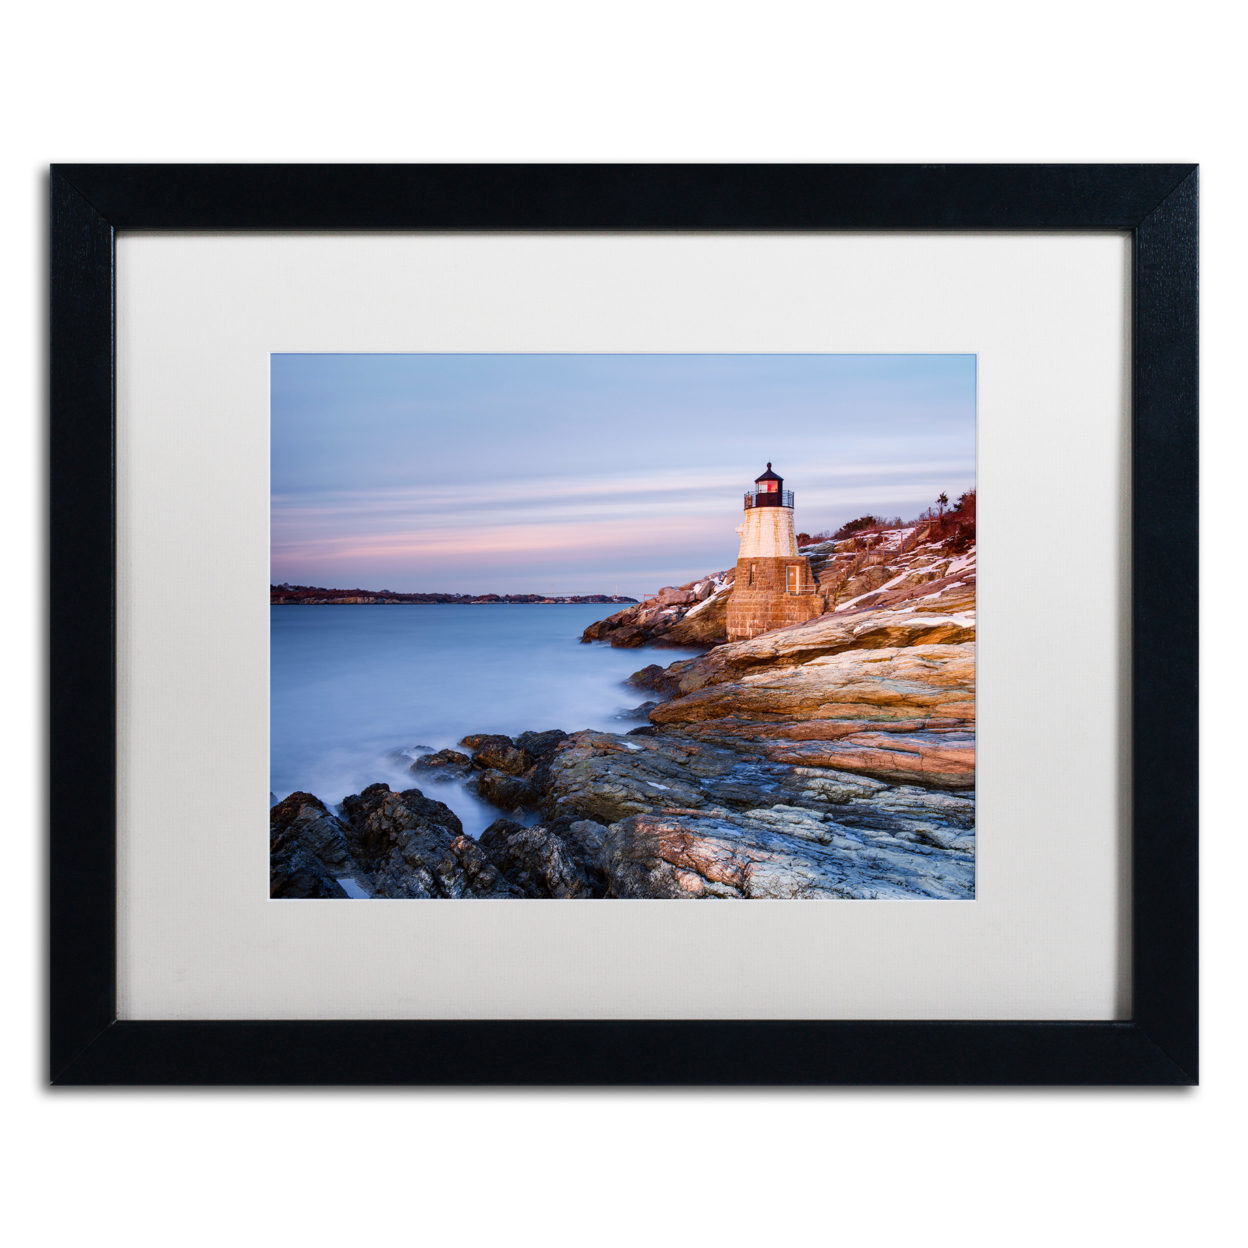 Michael Blanchette Photography 'Stone On Rock' Black Wooden Framed Art 18 X 22 Inches